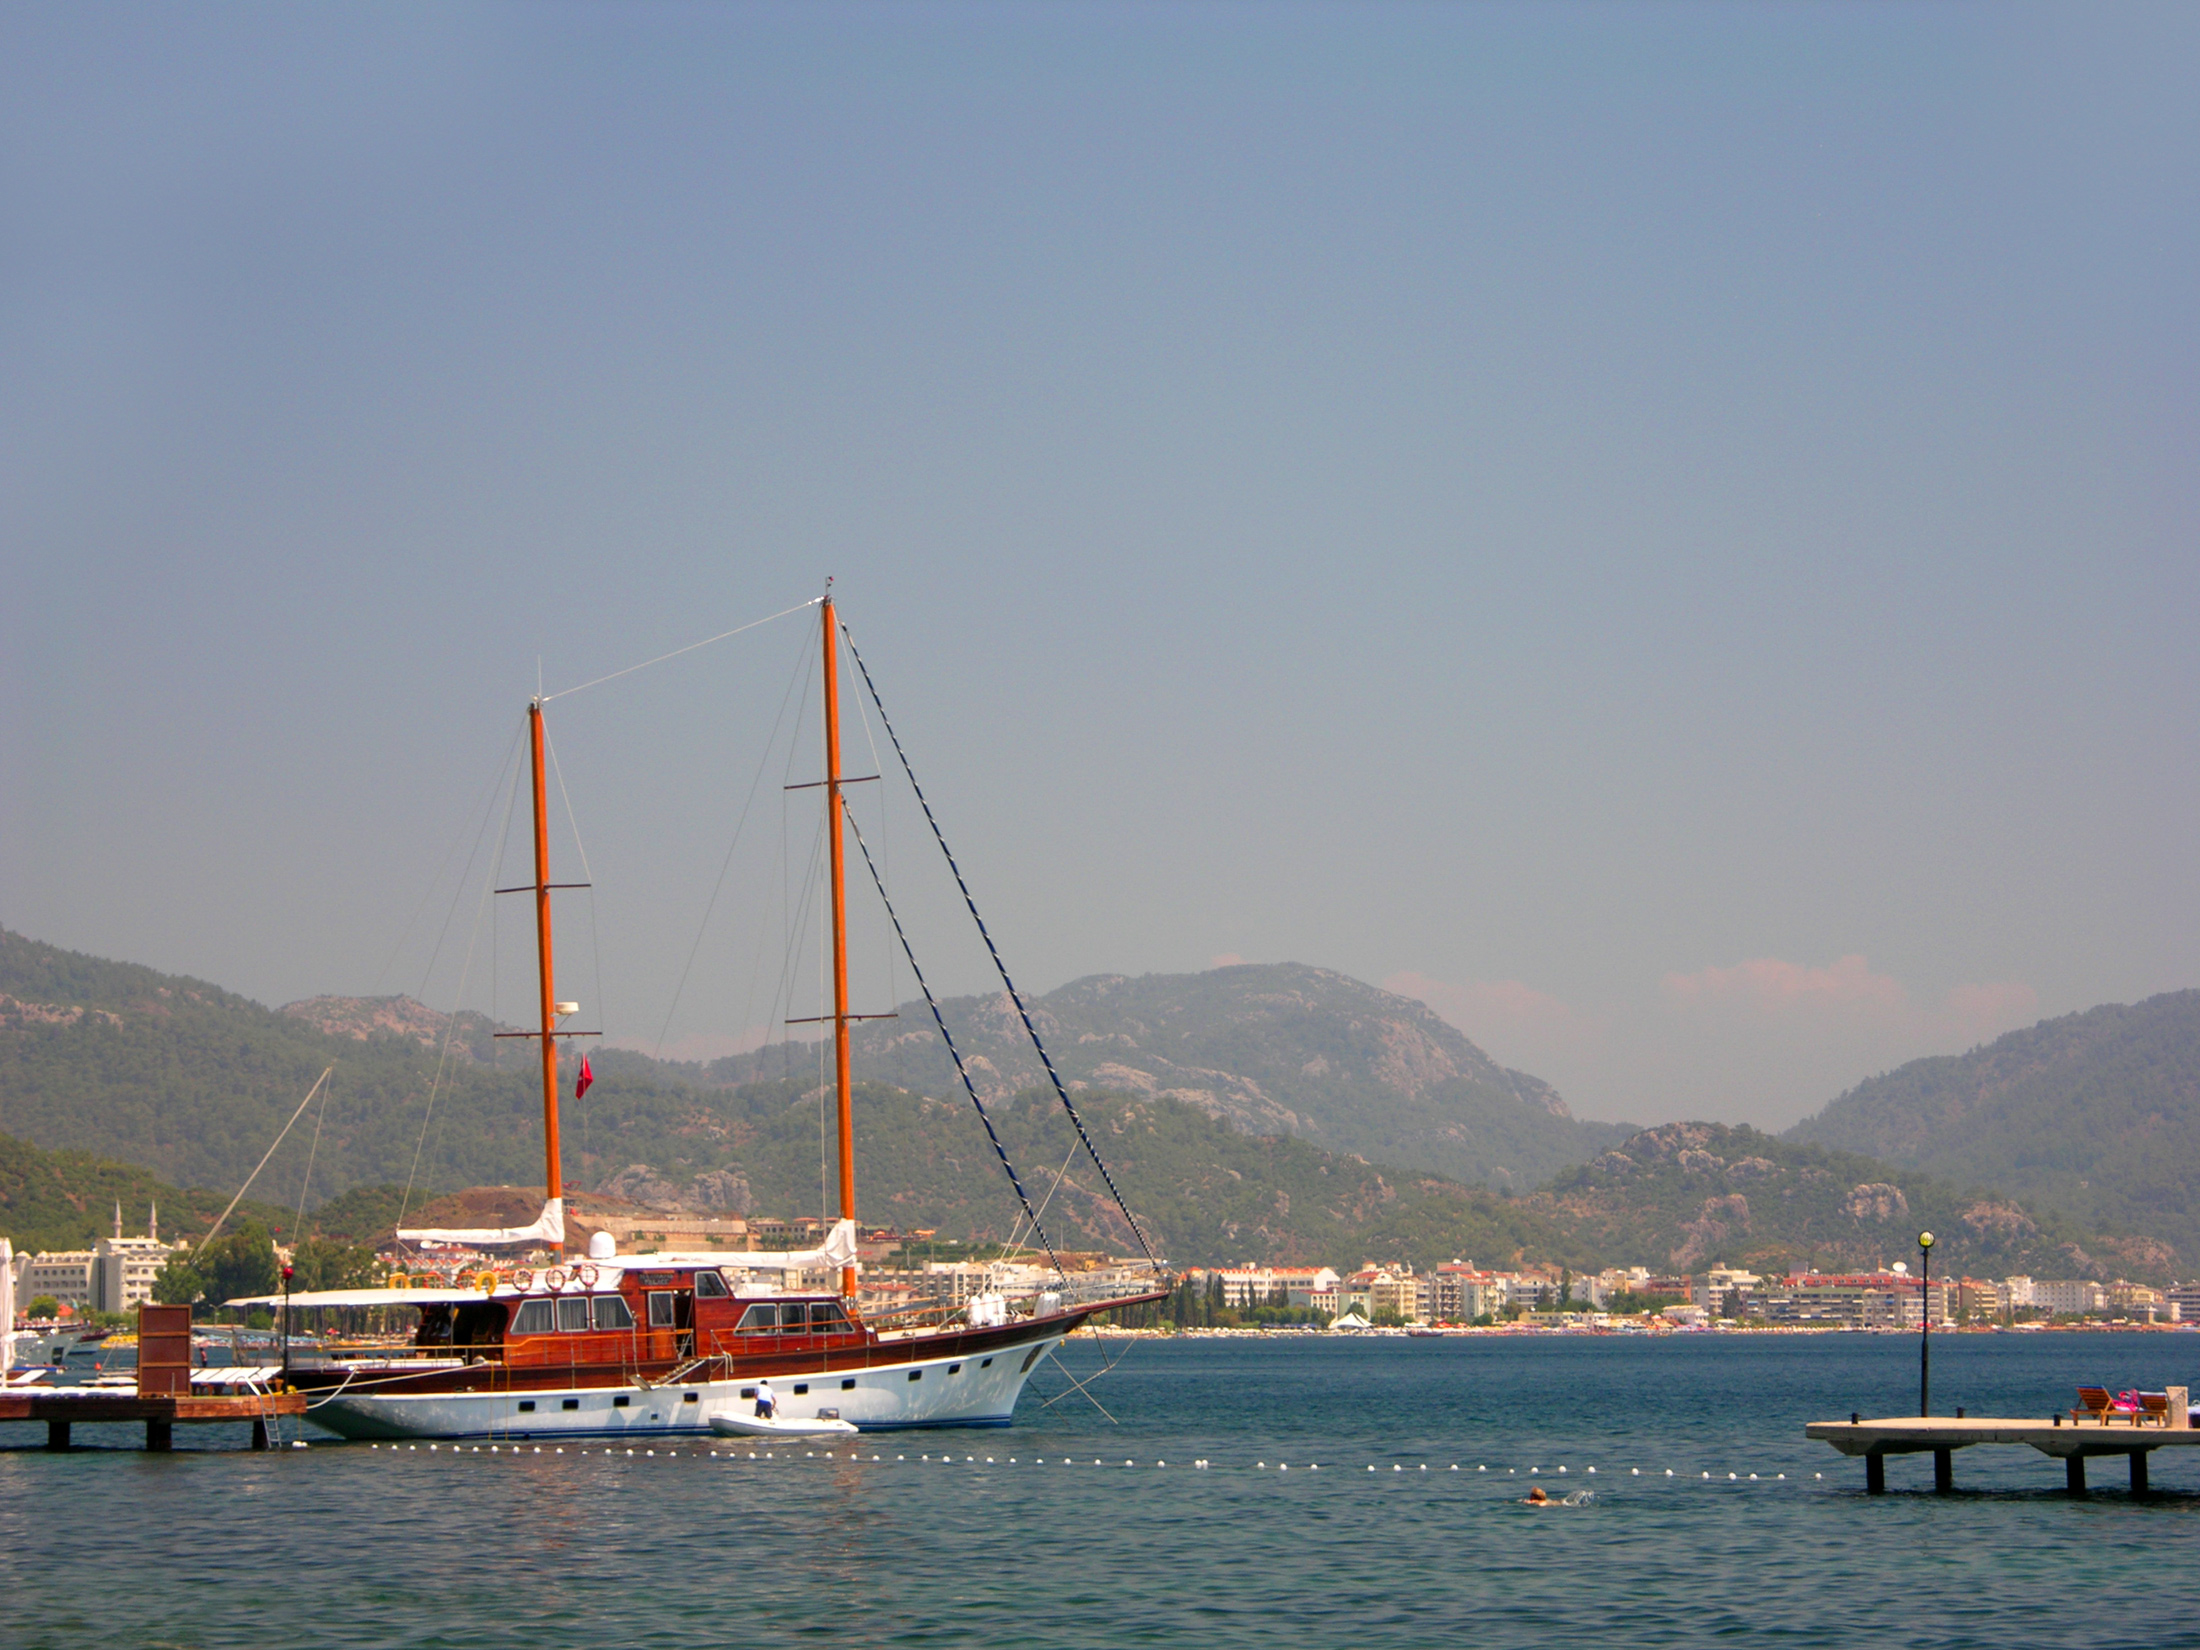 A view of Marmaris bay with an yacht in the foreground